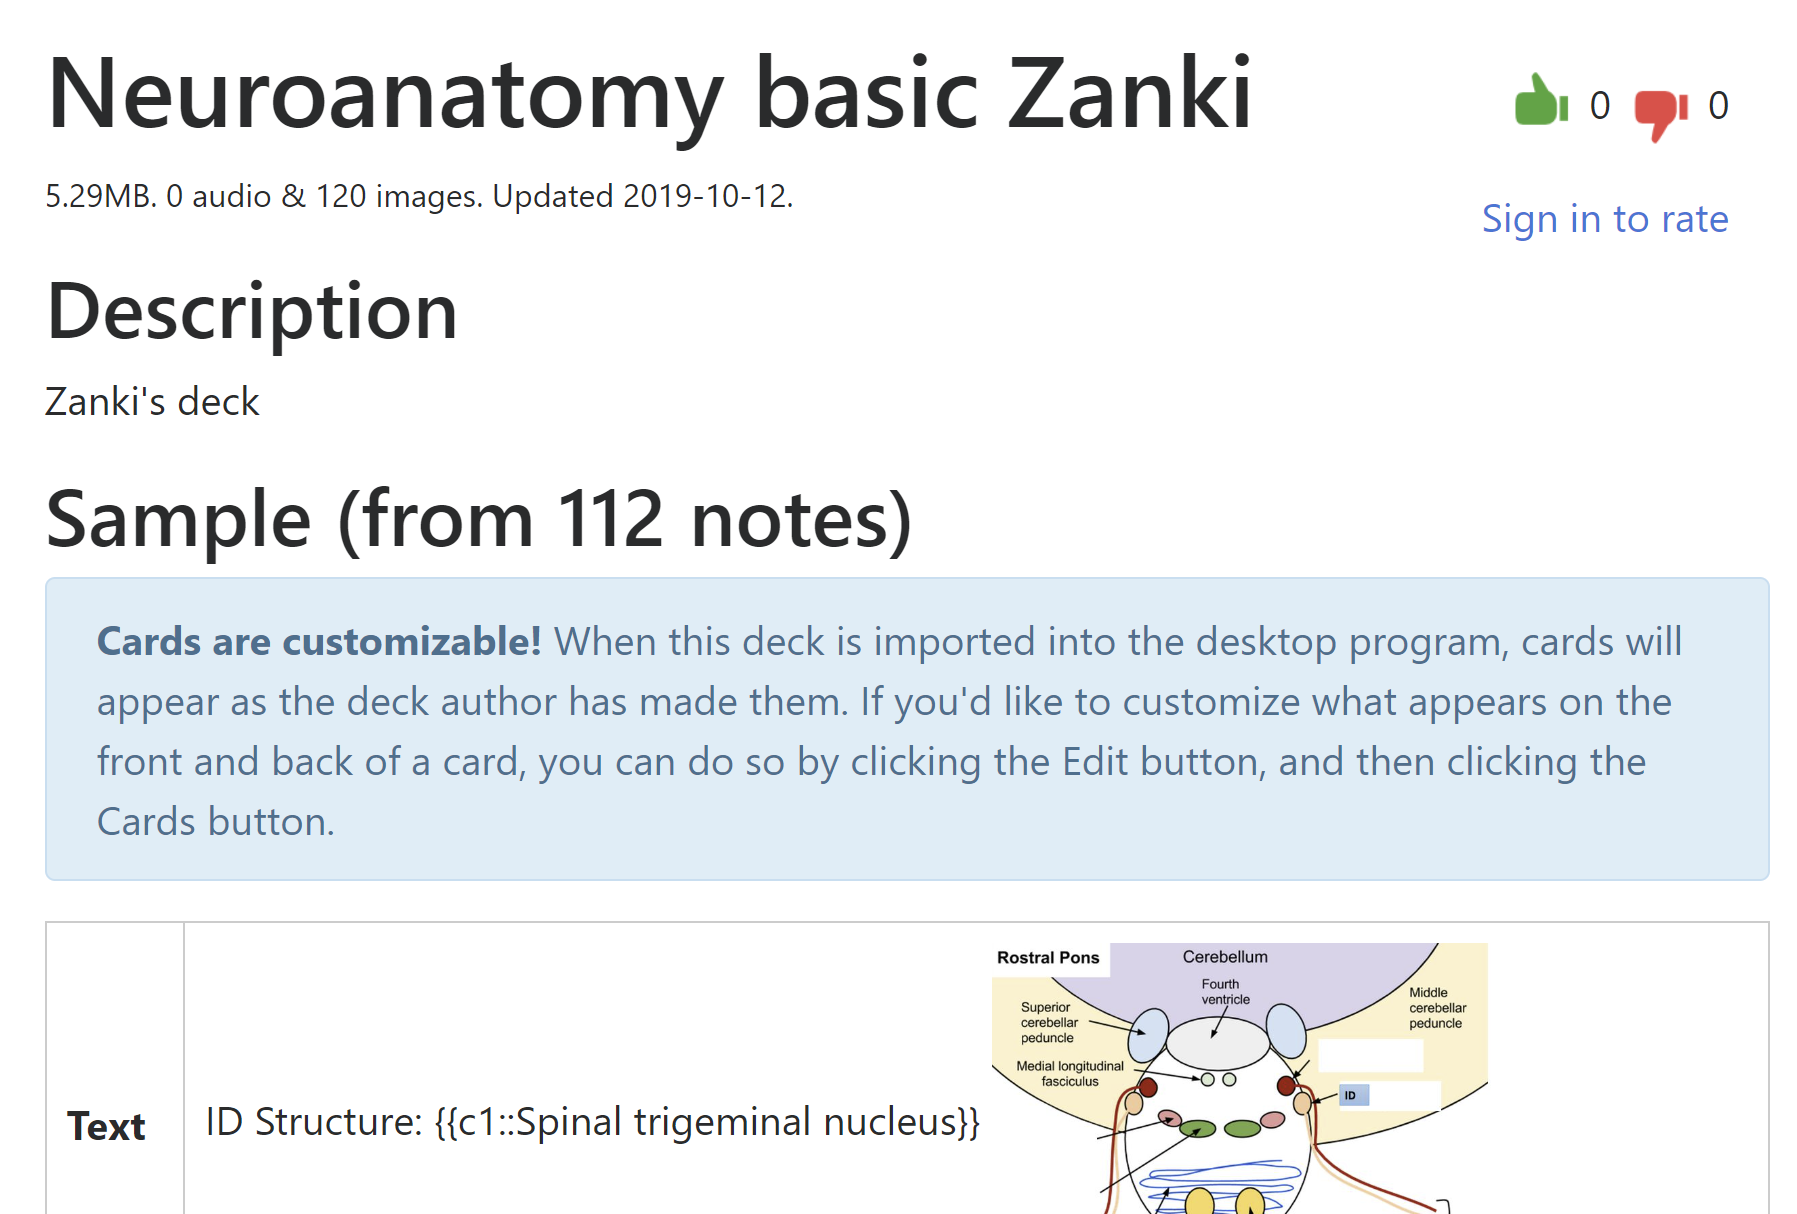 Zanki is a great source to use for neuroanatomy, it's readily available online.